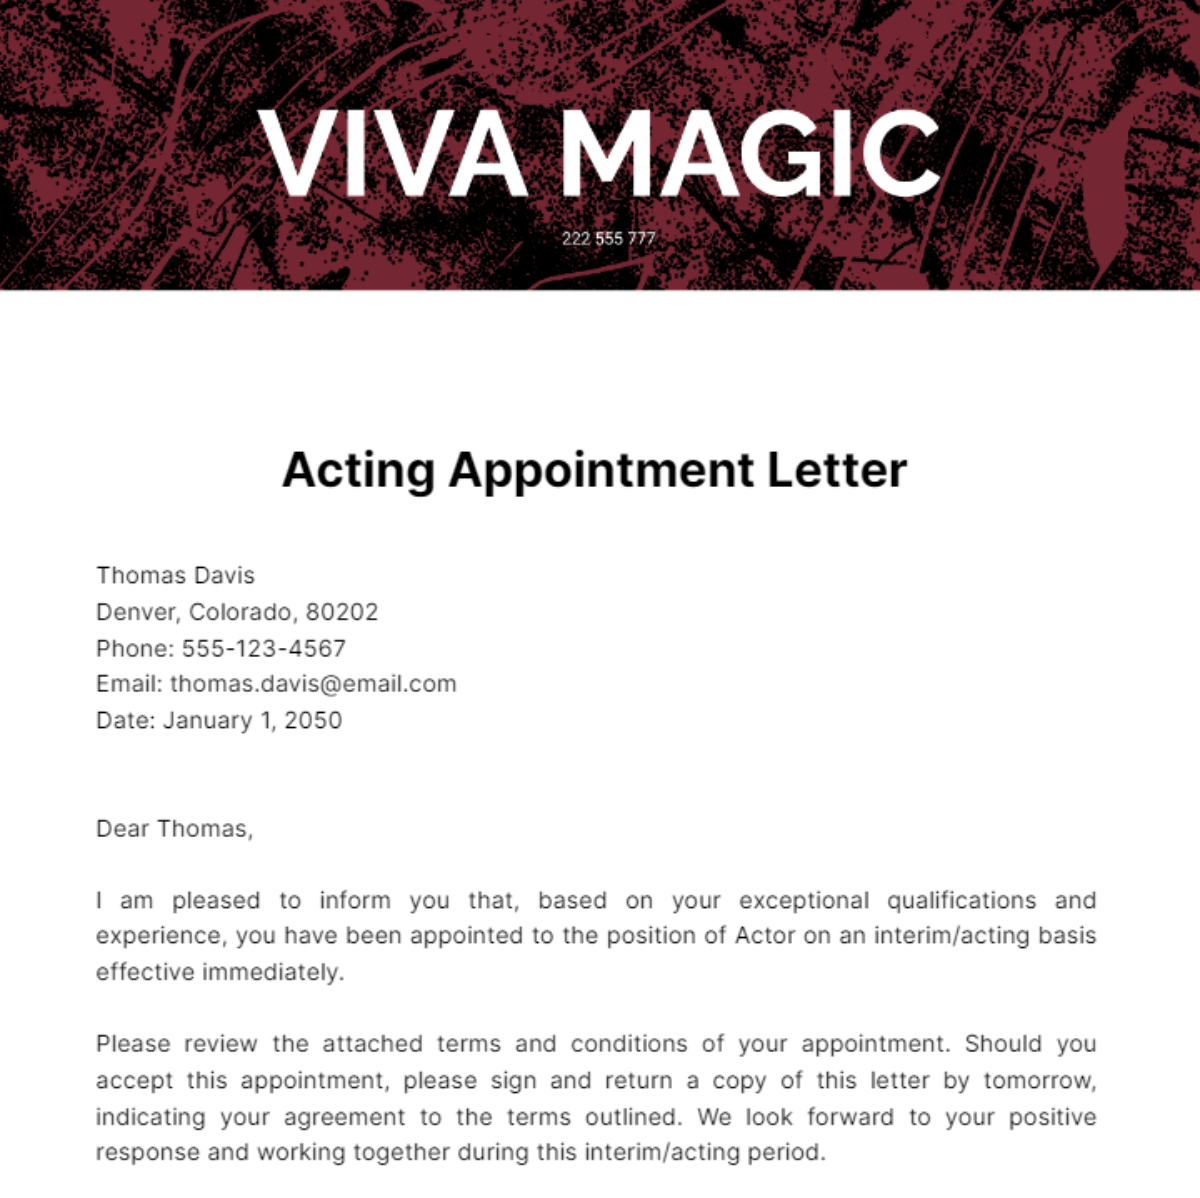 Acting Appointment Letter Template